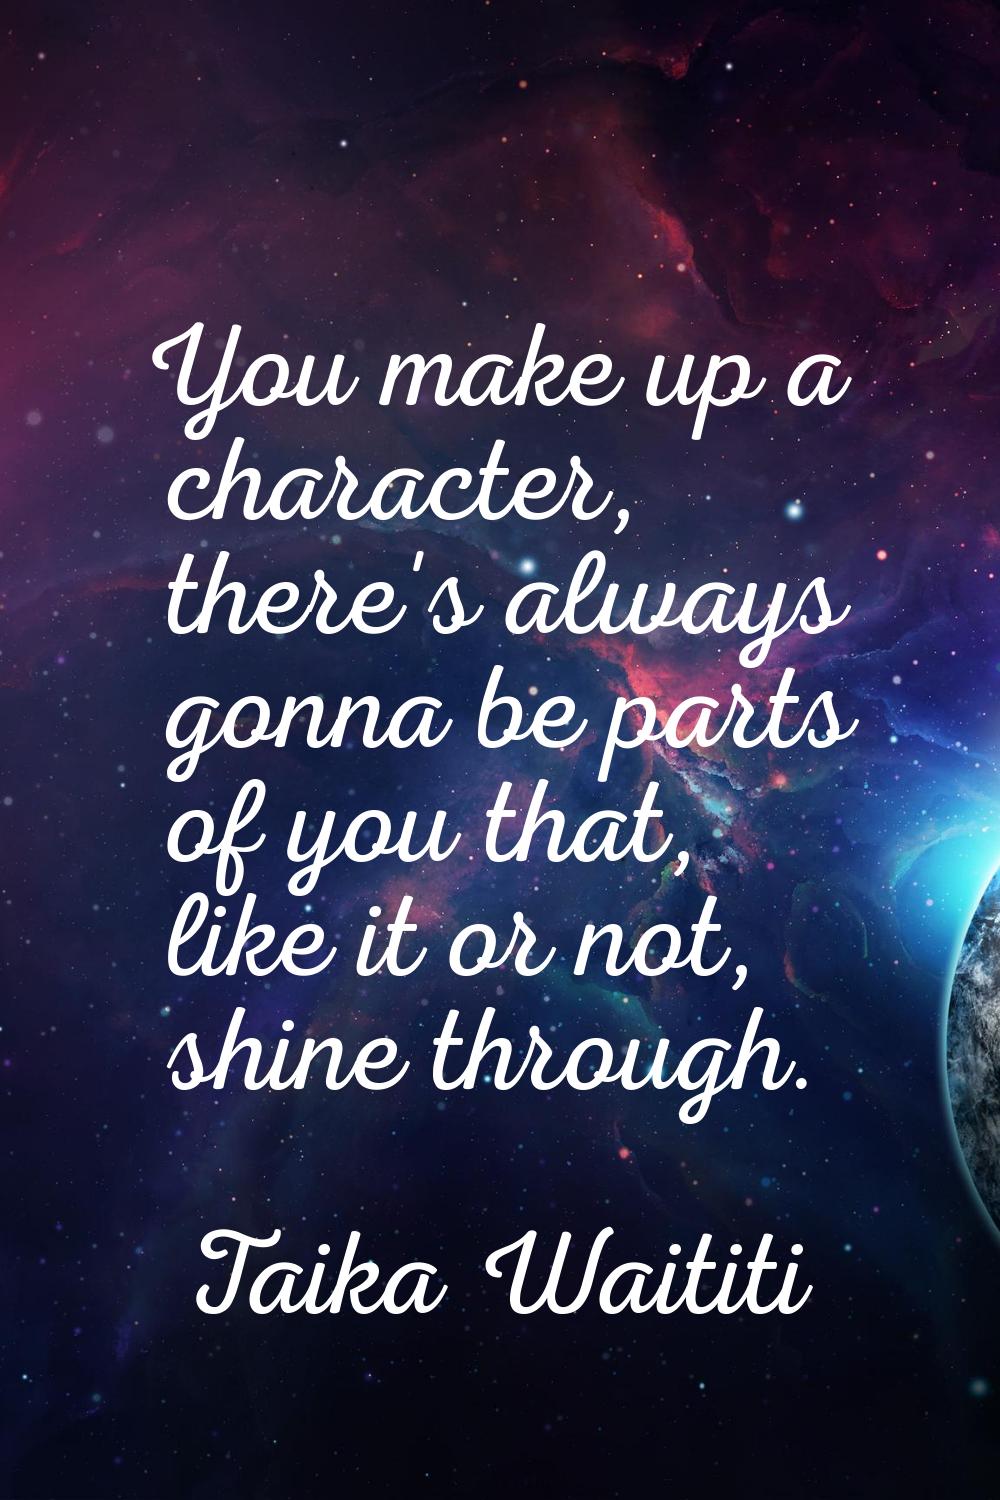 You make up a character, there's always gonna be parts of you that, like it or not, shine through.